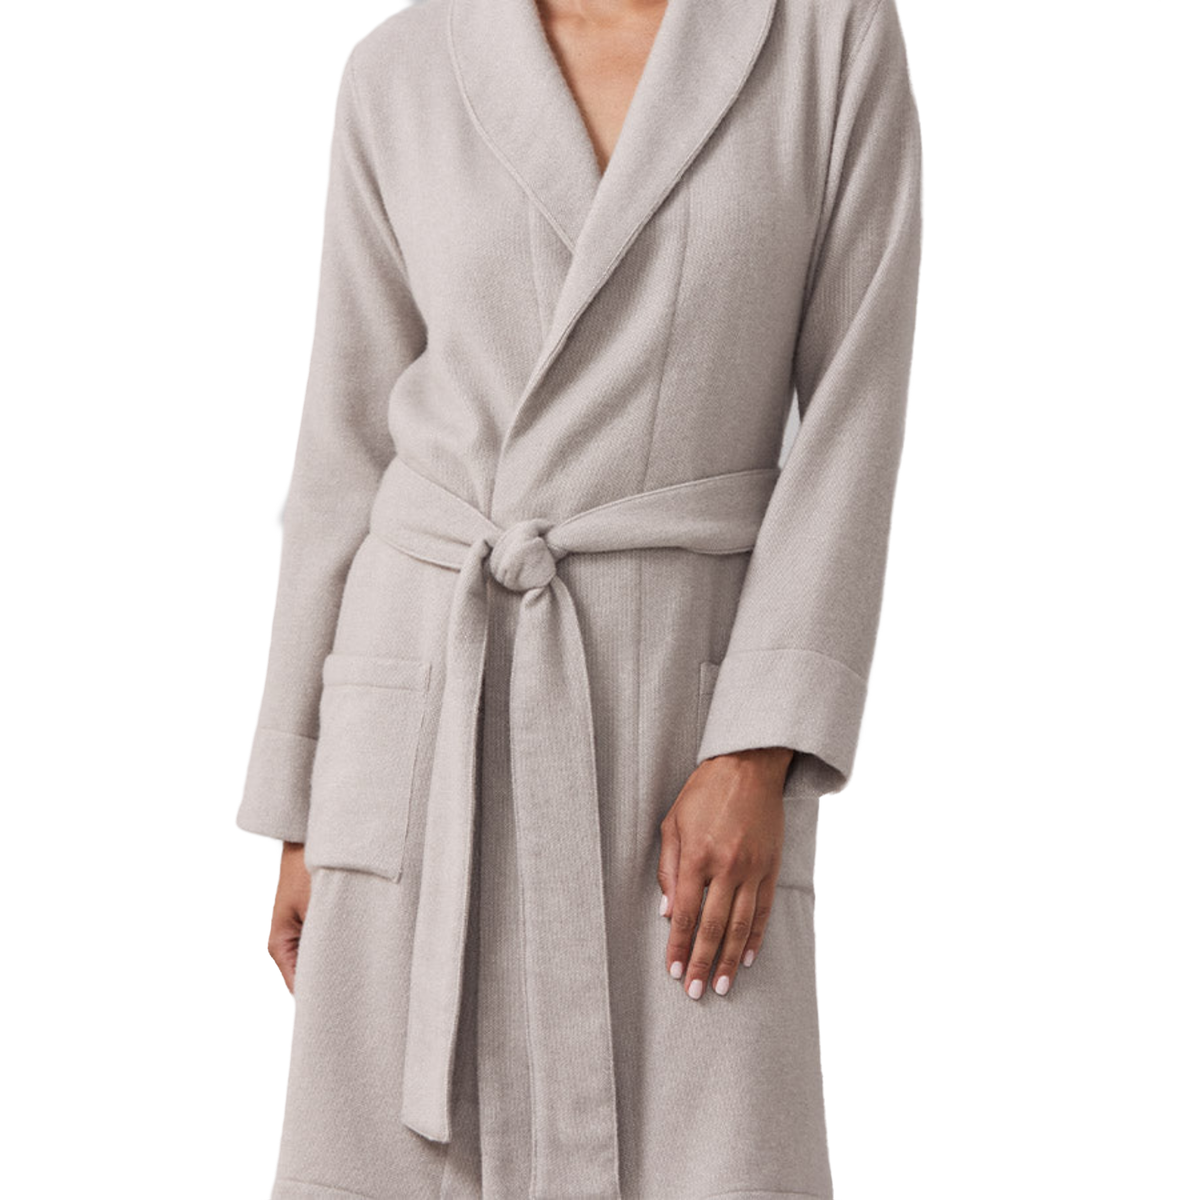 Front View of Model Wearing of Sferra Sardinia’s Cashmere Robes in Grey Color